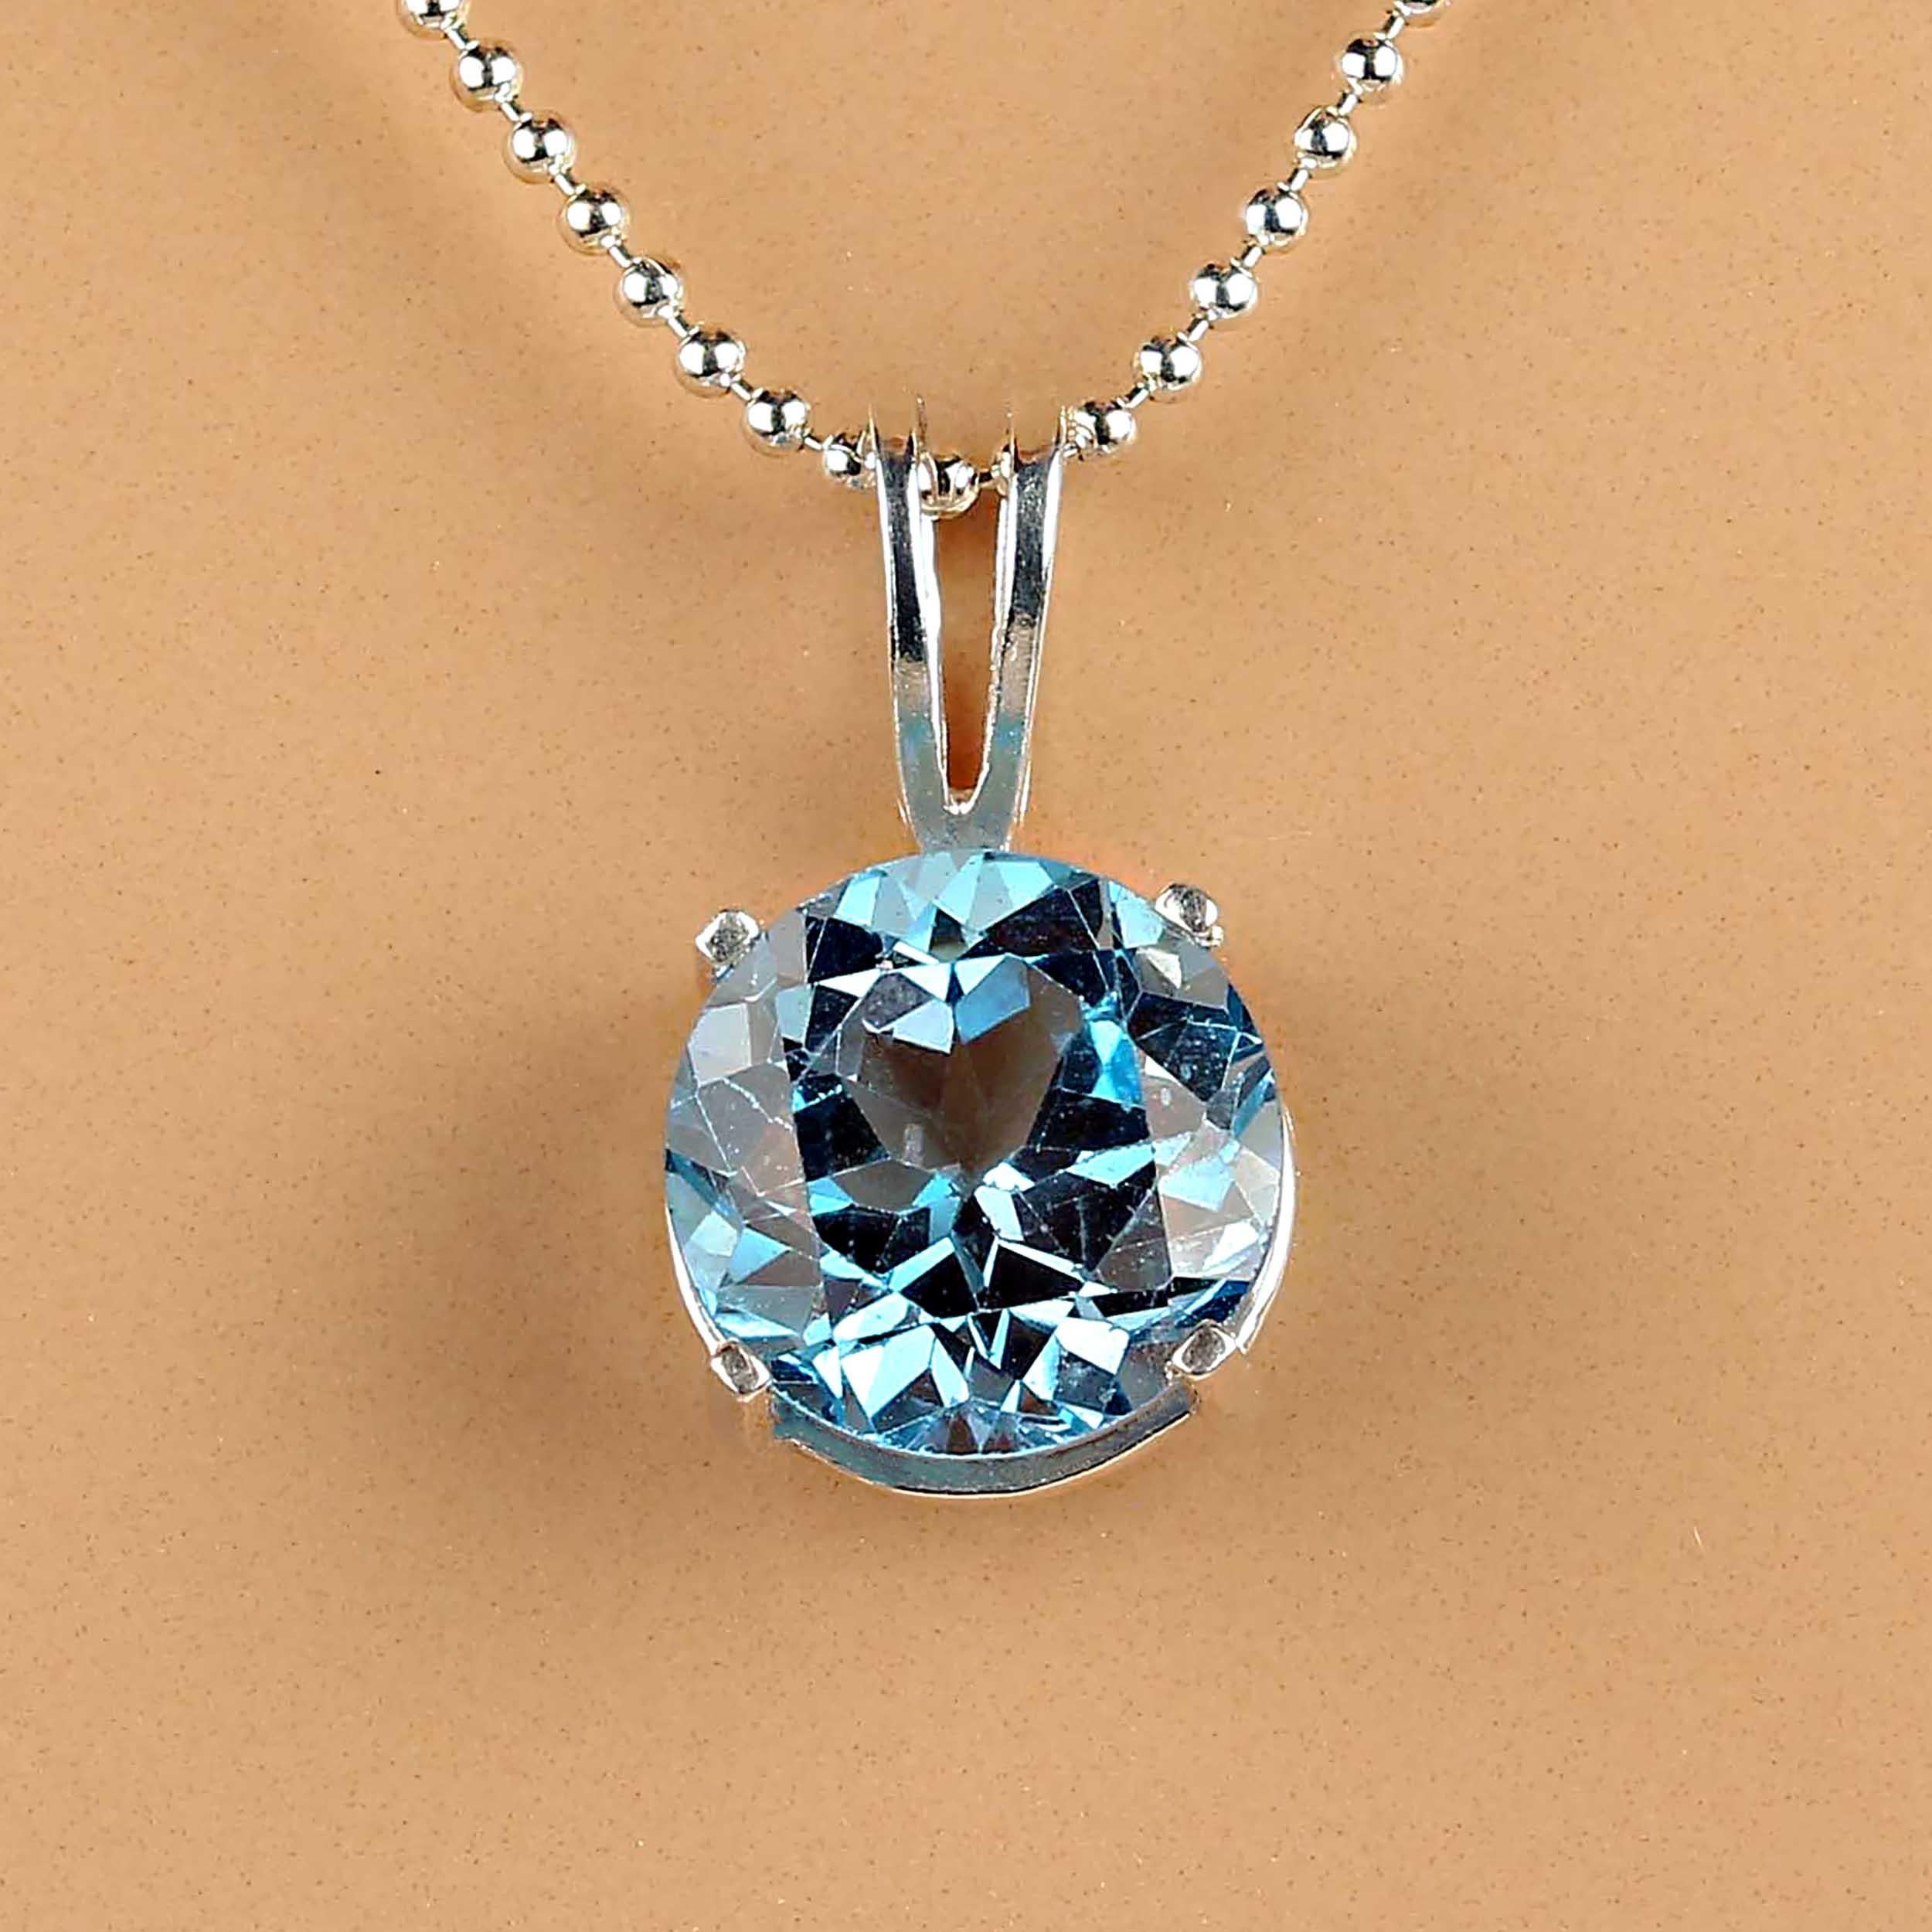 5Ct sparkling Swiss Blue Topaz and Sterling Silver pendant.  This is a delightful 10MM gemstone that has so much life!  The Sterling Silver pendant is 3/4 inches in length and 7/16 inches in width. MP2302.